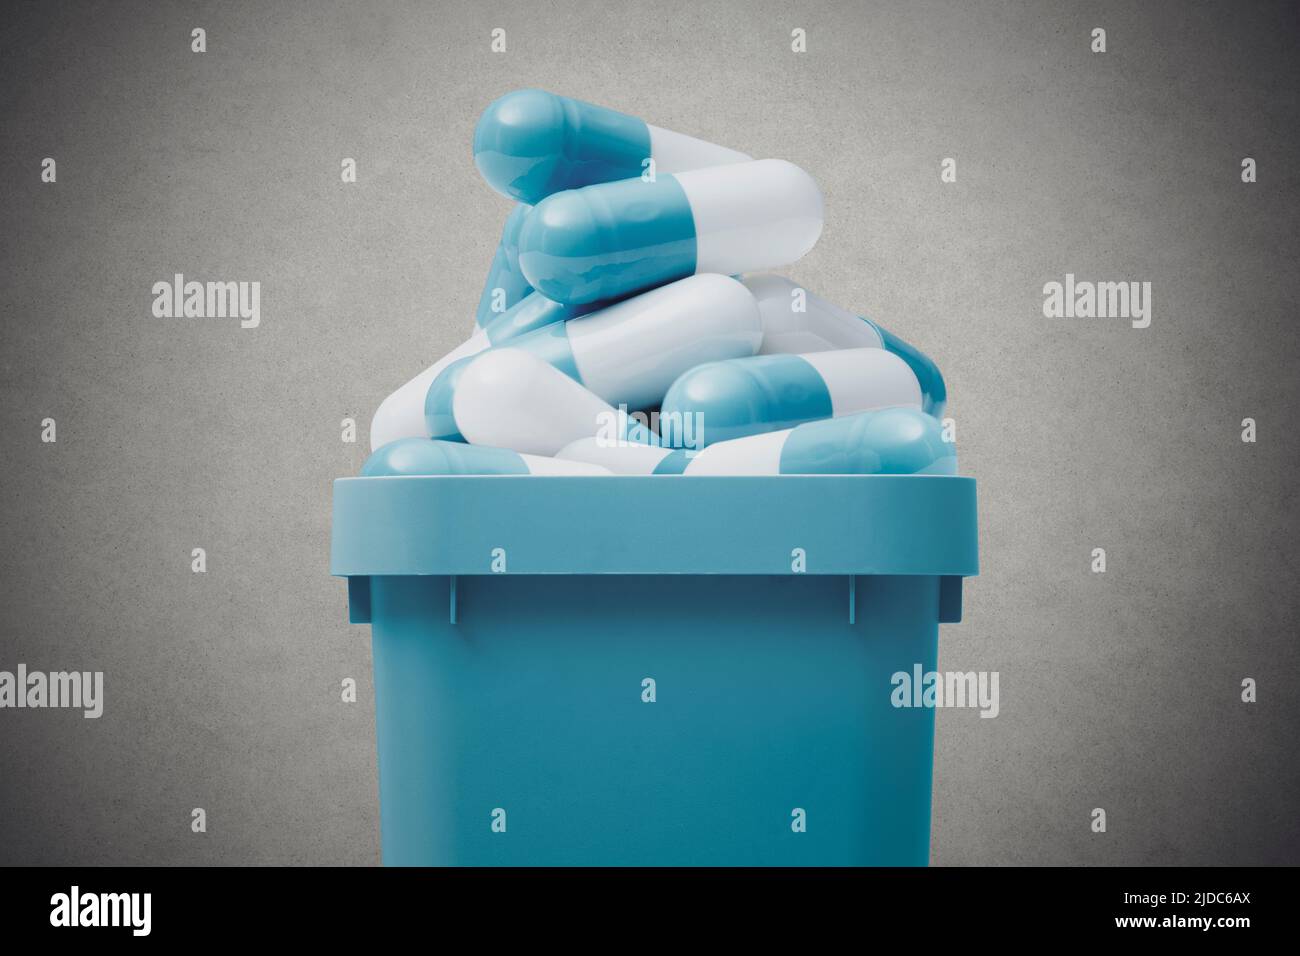 https://c8.alamy.com/comp/2JDC6AX/trash-can-full-of-expired-pills-medical-waste-disposal-concept-2JDC6AX.jpg